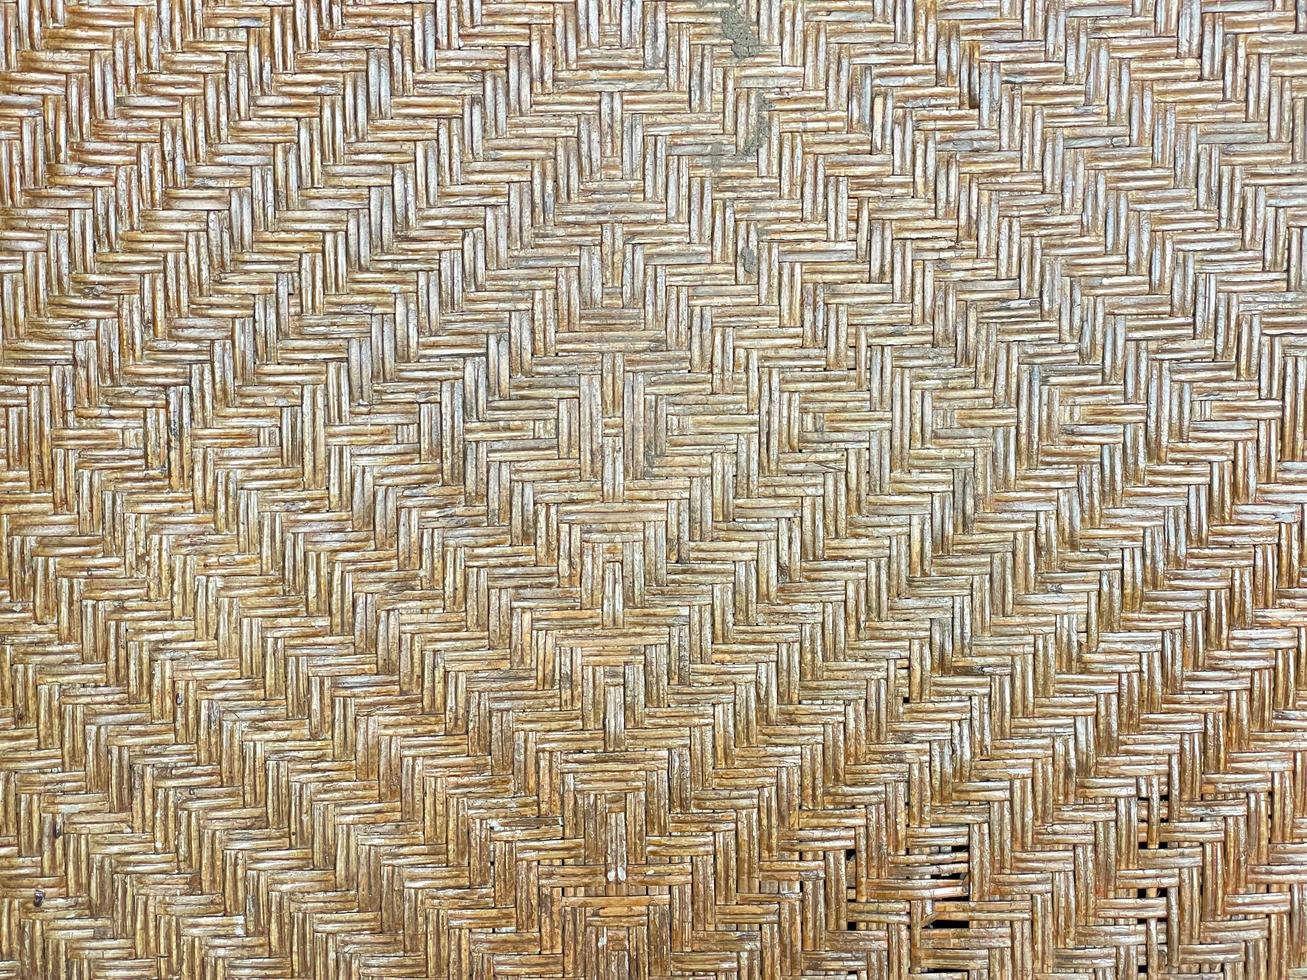 rattan that forms a detailed pattern naturally. neatly embroidered without any strain and weathered color. used for texture backgrounds photo